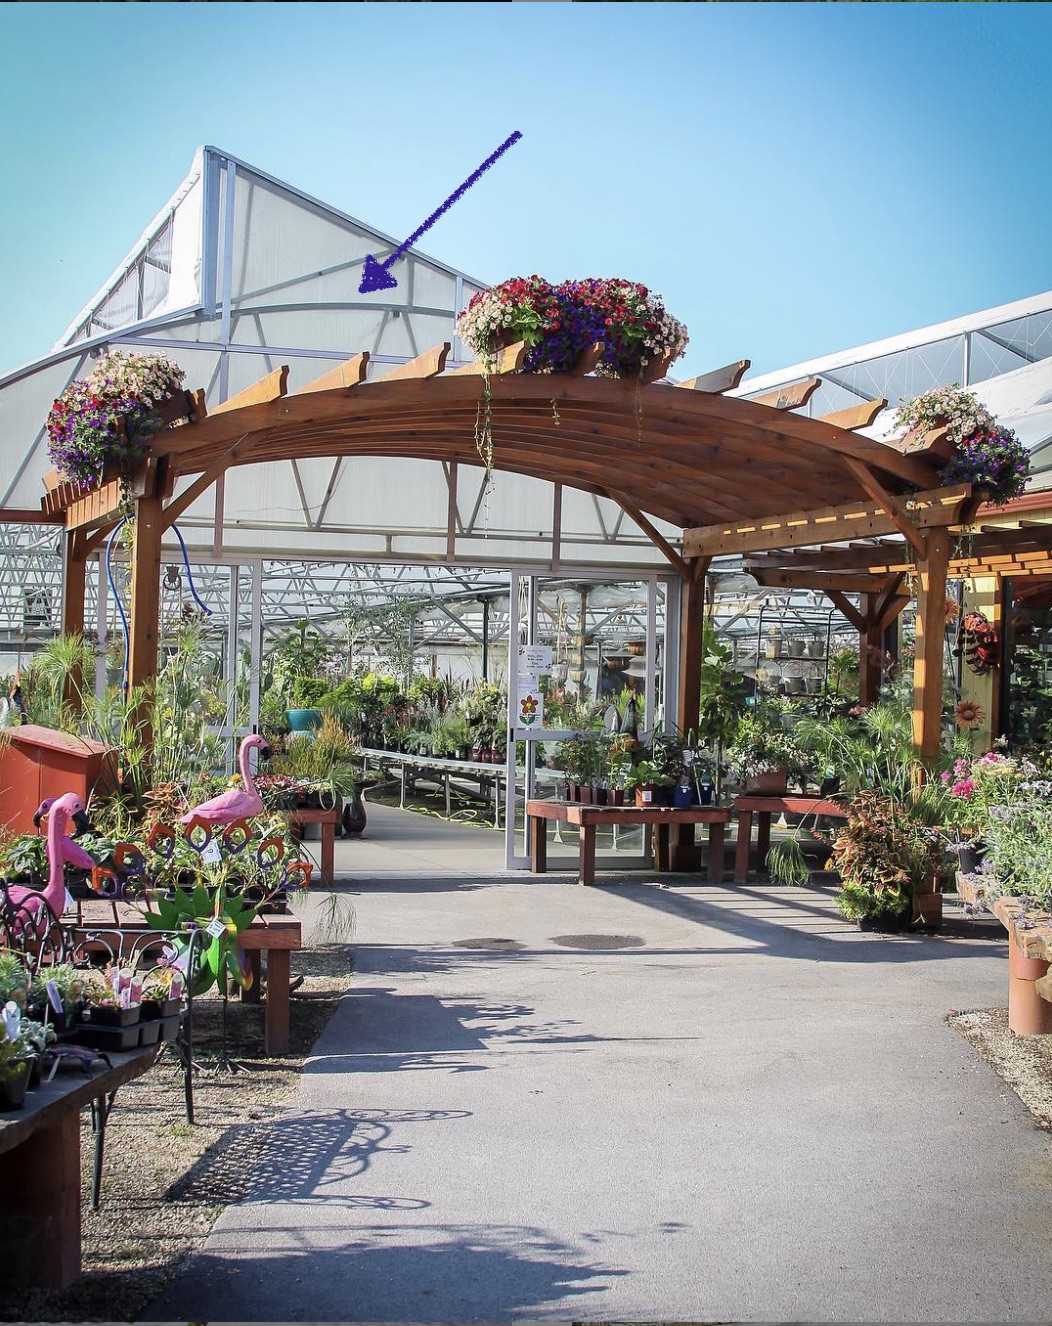 Our engineers matched the pergola roof with the curved greenhouse roof.